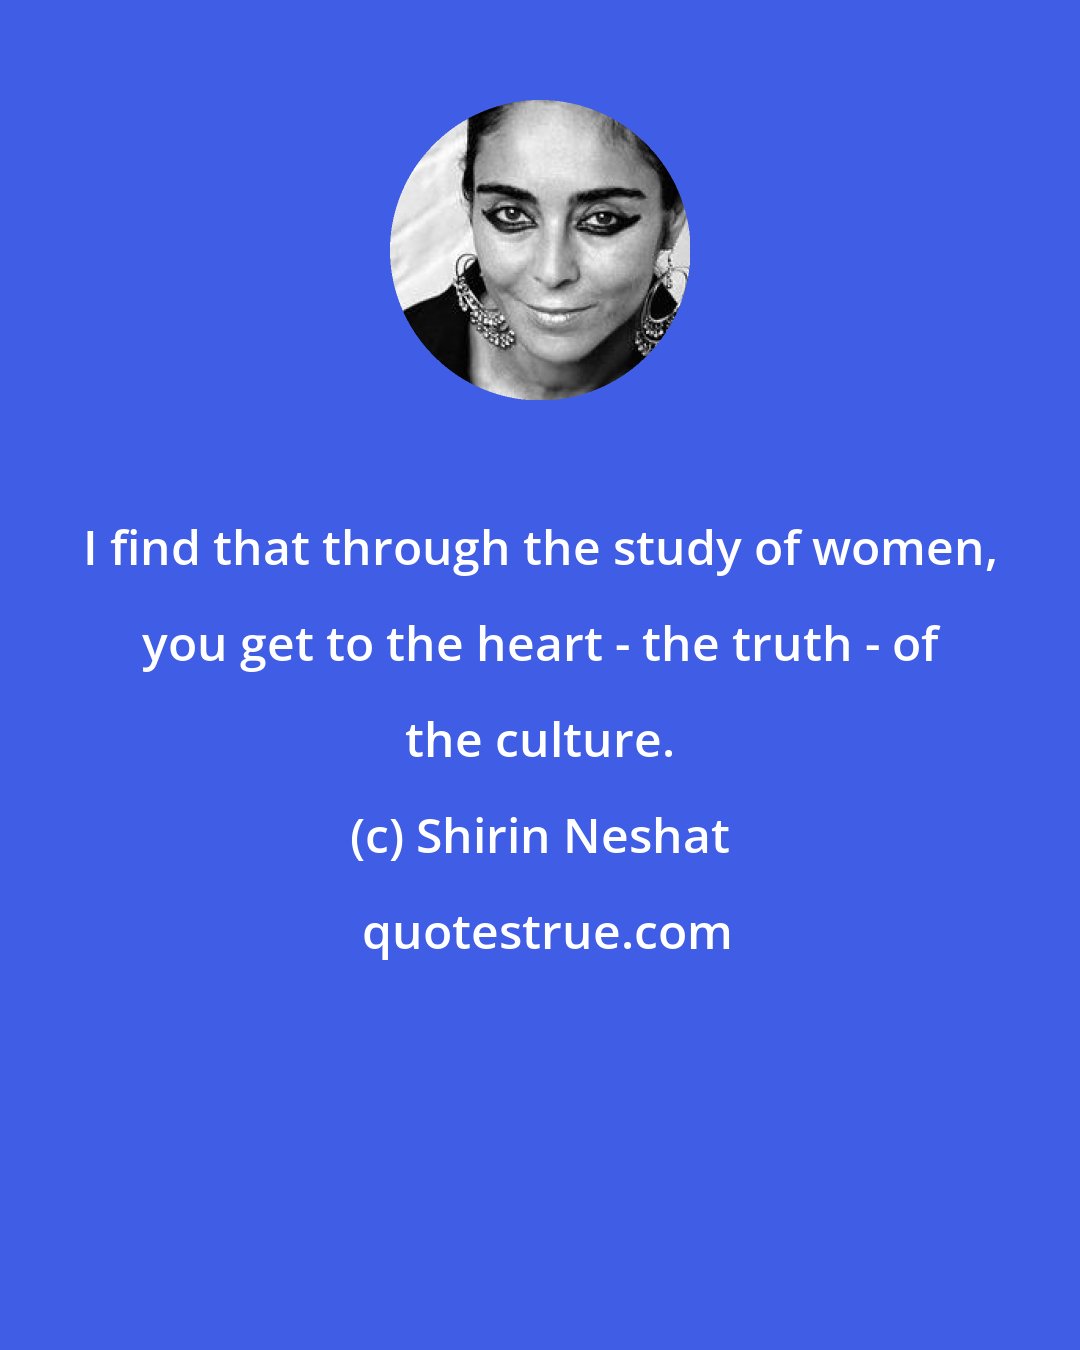 Shirin Neshat: I find that through the study of women, you get to the heart - the truth - of the culture.